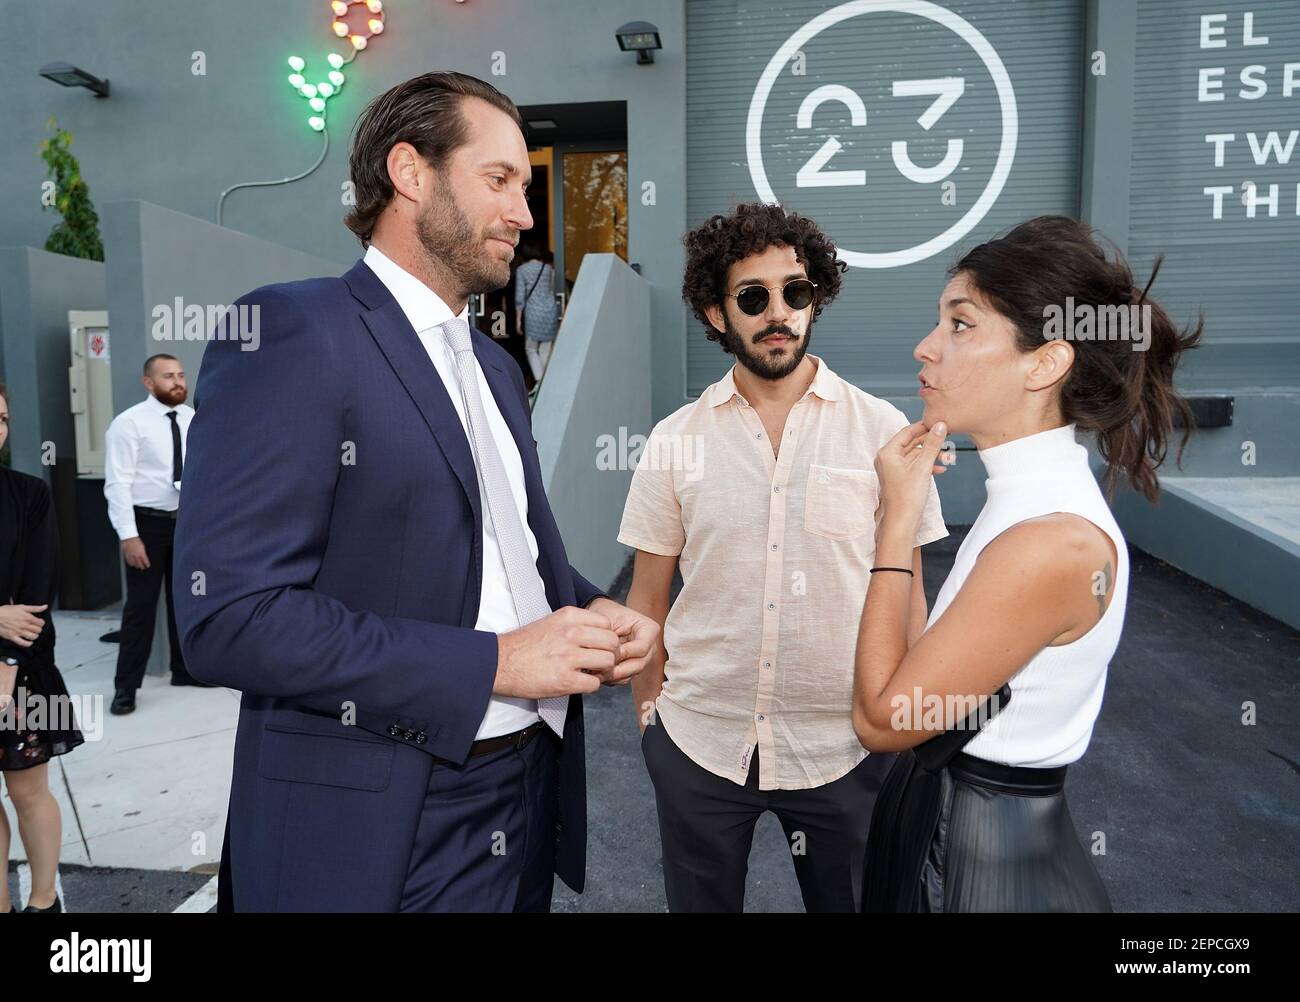 MIAMI, FL - DEC 2: Jon Paul Perez, Anthony Spinello and Agustina Woodgate  are seen during El Espacio Twenty Three Gallery to view Jorge M. Perez  private art collection during Art Basel